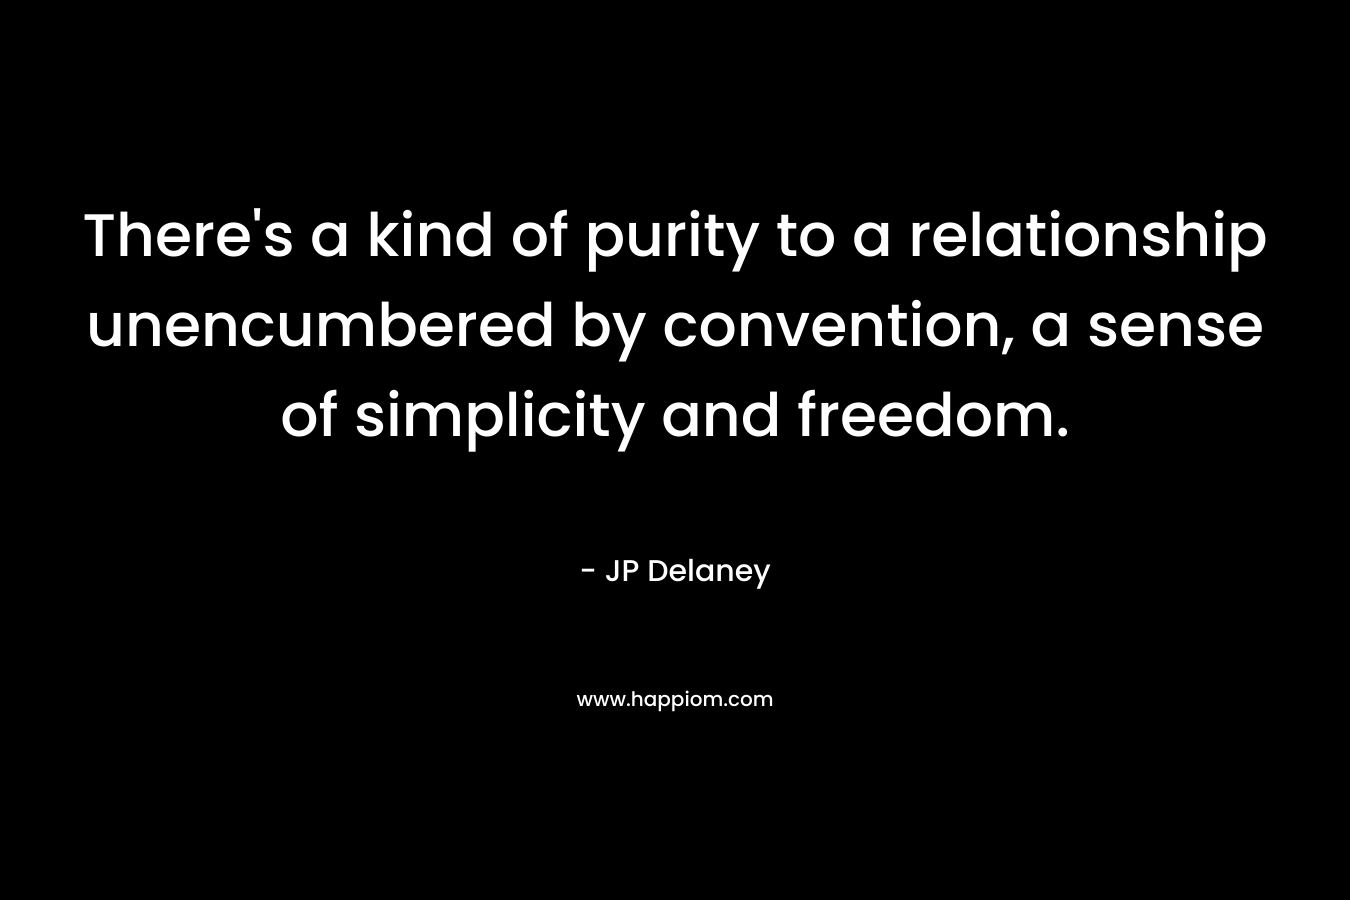 There's a kind of purity to a relationship unencumbered by convention, a sense of simplicity and freedom.